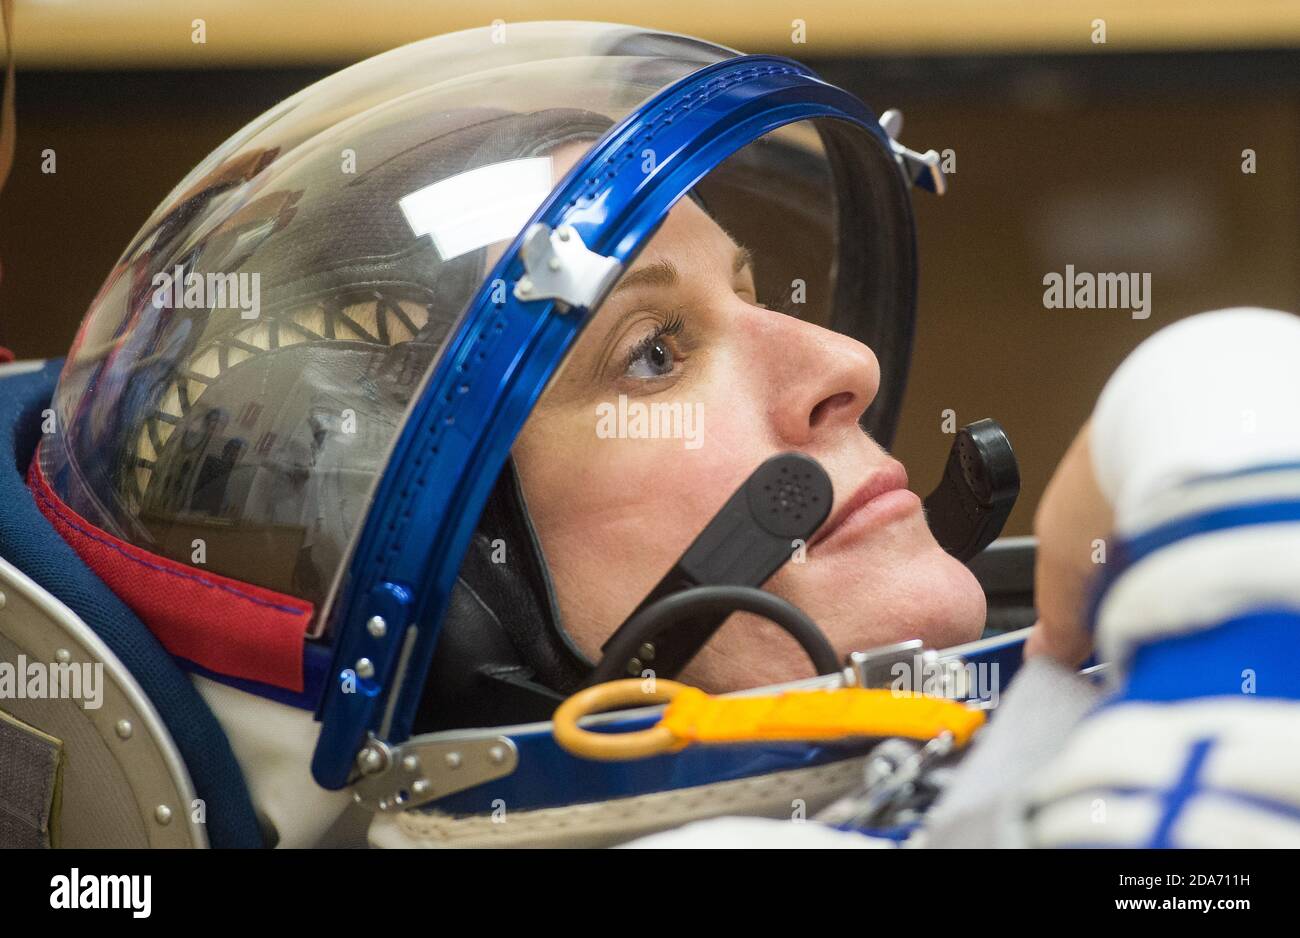 BAIKONUR COSMODRONE, KAZAKHSTAN - 28 September 2020 - ISS Expedition 64 NASA astronaut Kate Rubins is seen while having her Sokol suit pressure checke Stock Photo